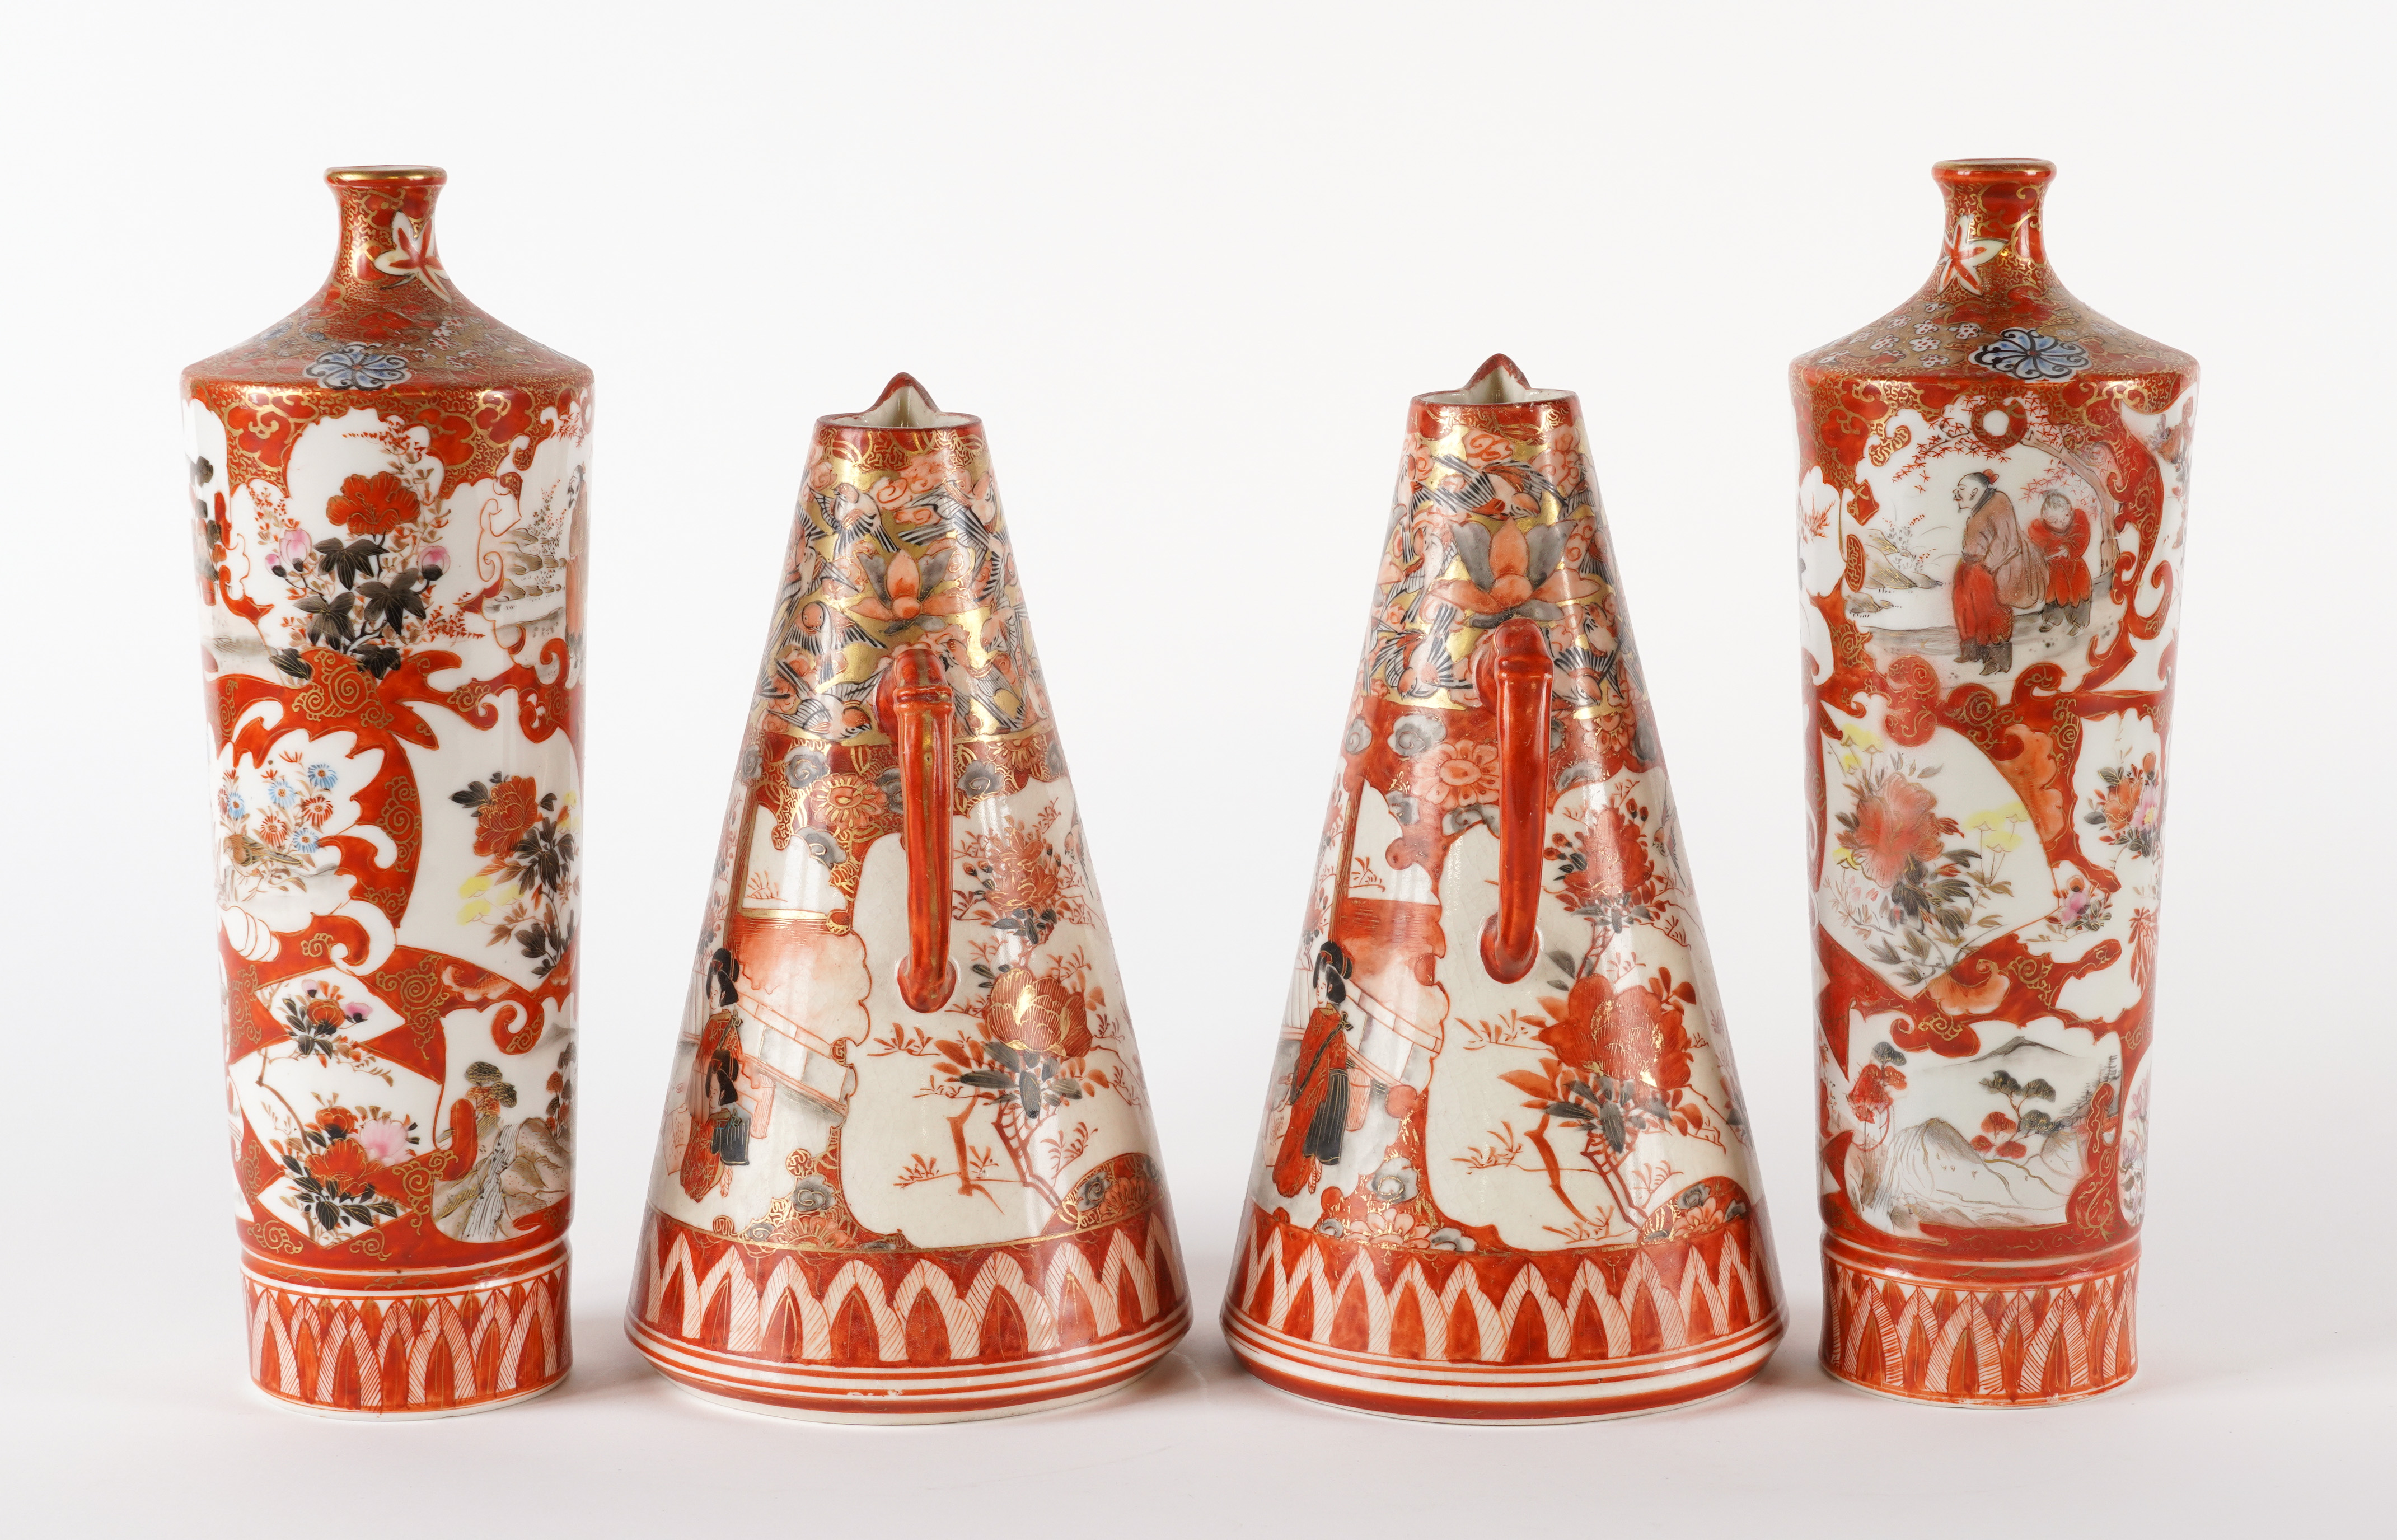 A PAIR OF JAPANESE KUTANI CONICAL JUGS AND A PAIR OF TAPERED CYLINDRICAL VASES (4) - Image 2 of 5